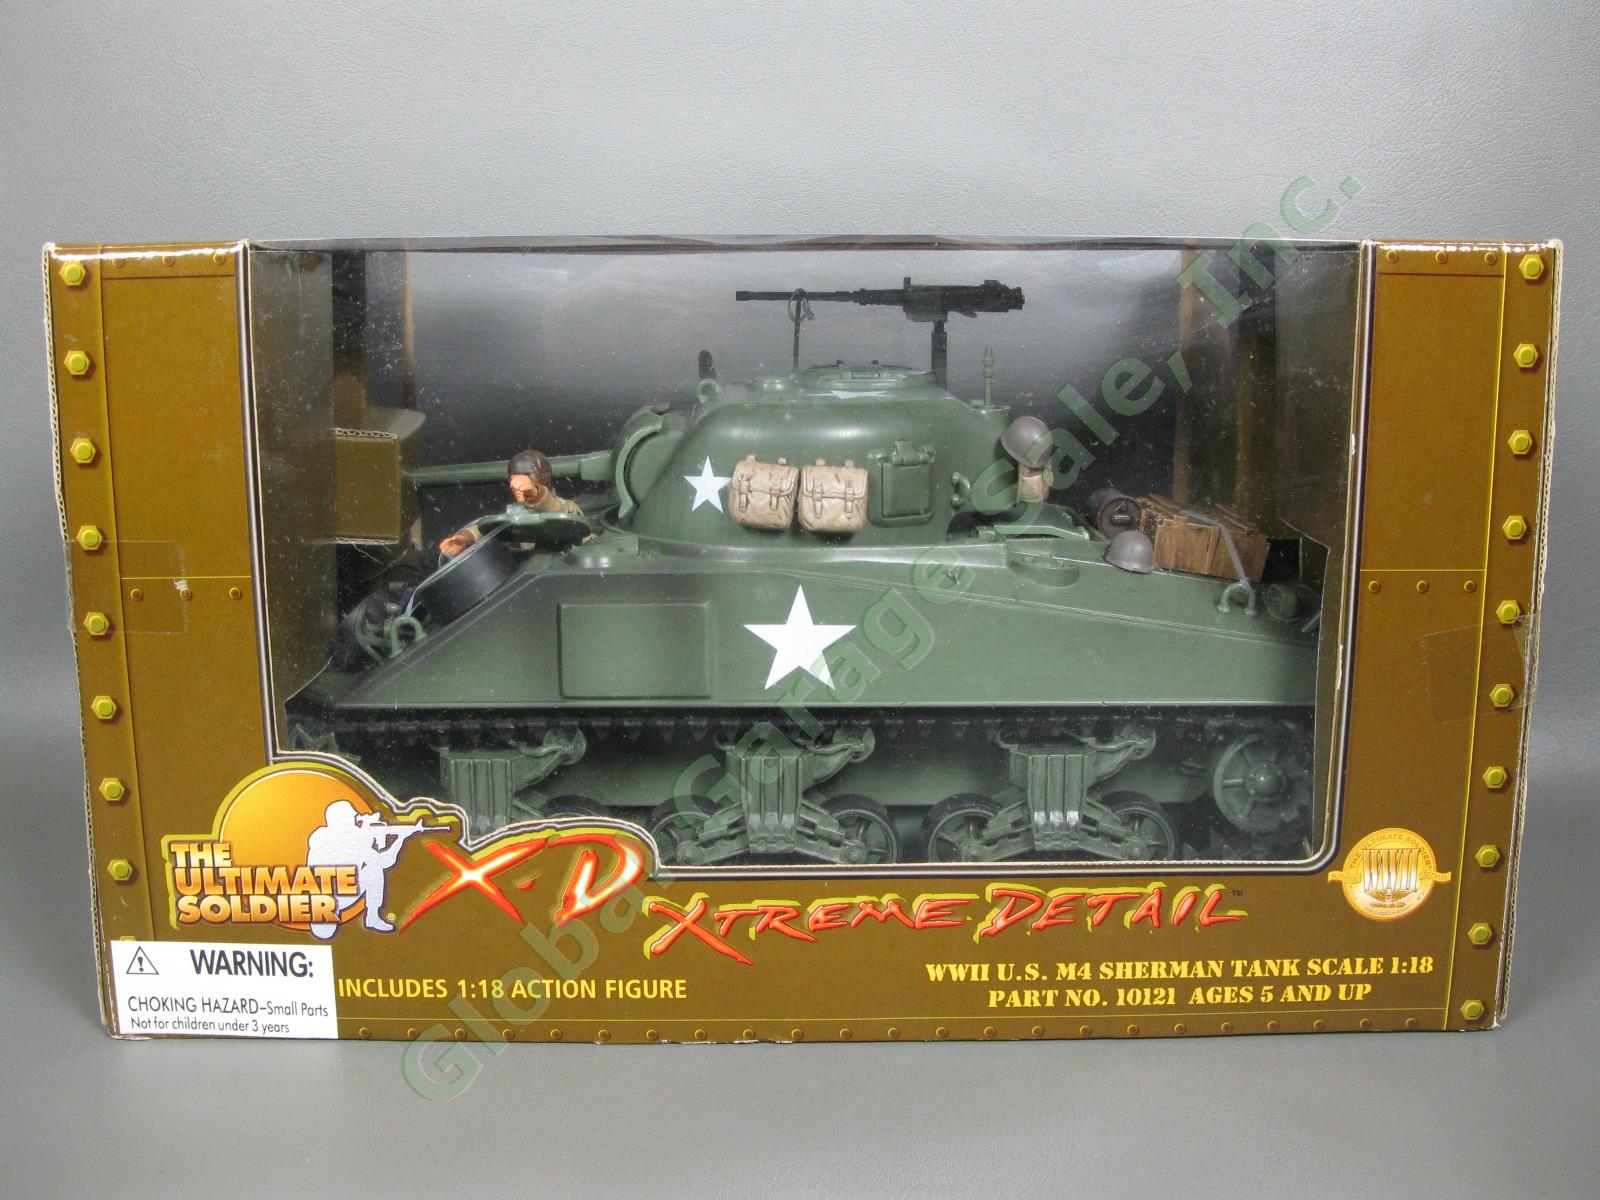 NEW Ultimate Soldier 1/18 WWII US Military M4 Sherman Tank 21st Century Toys NR